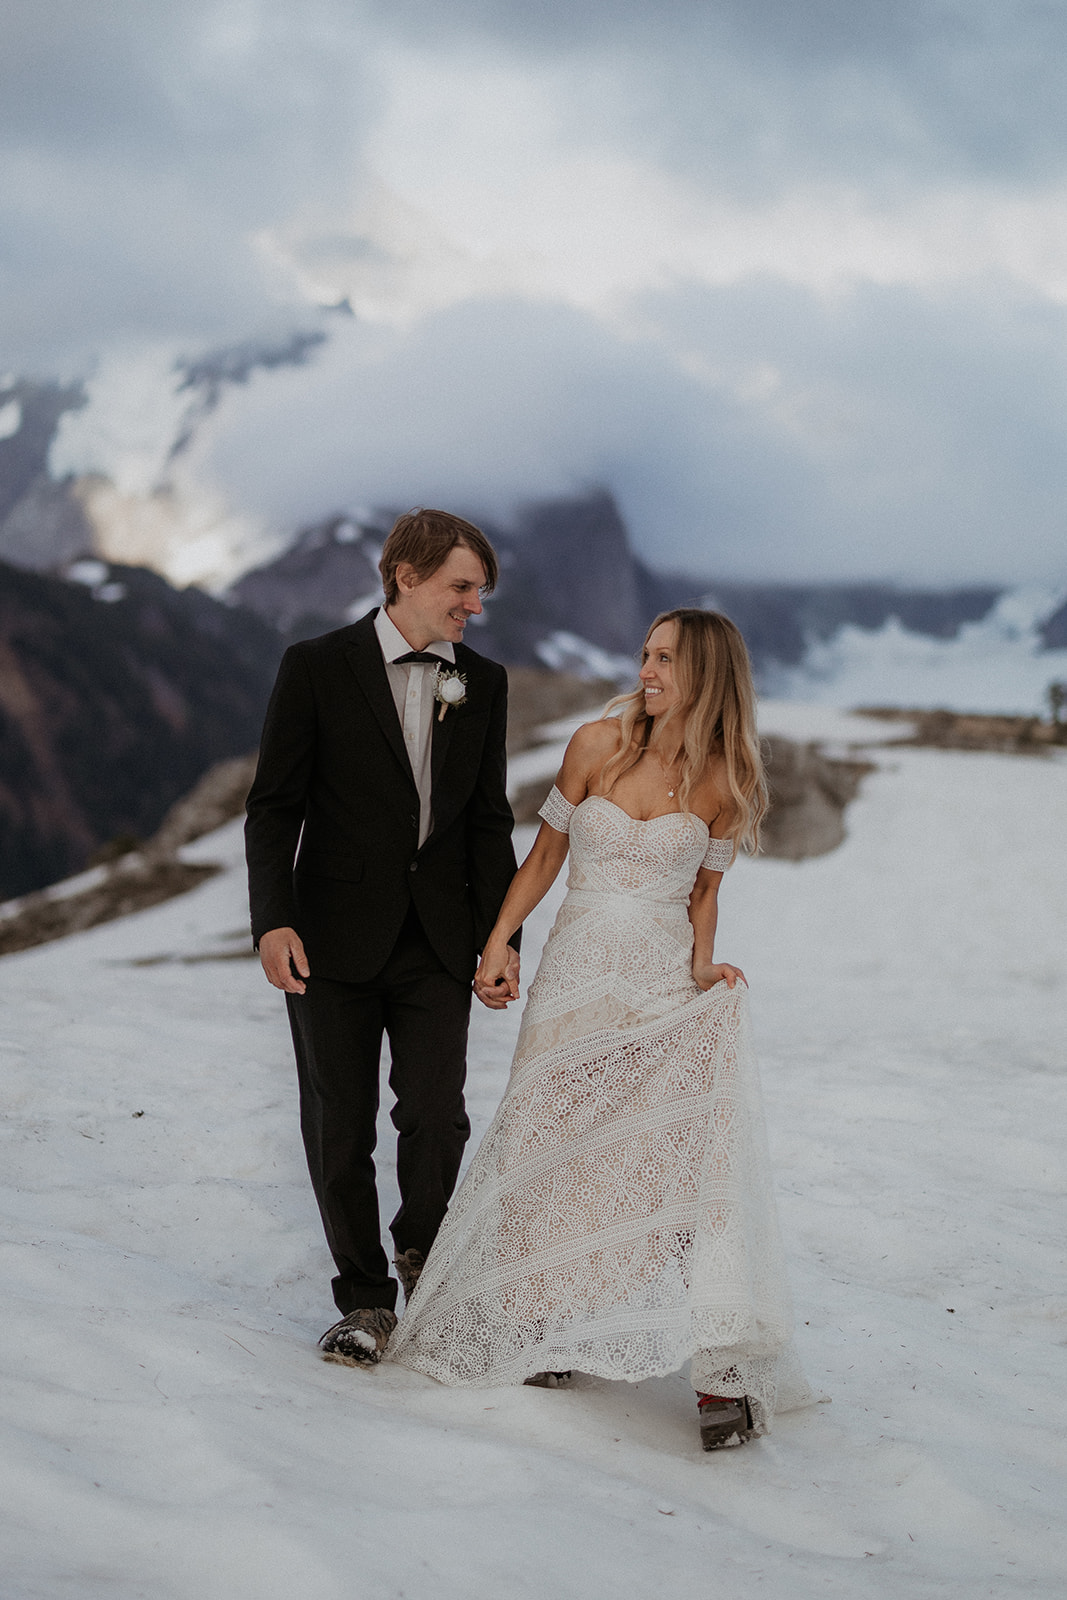 A bride and groom eloping at North Cascades National Park holding hands and walking through the snow.